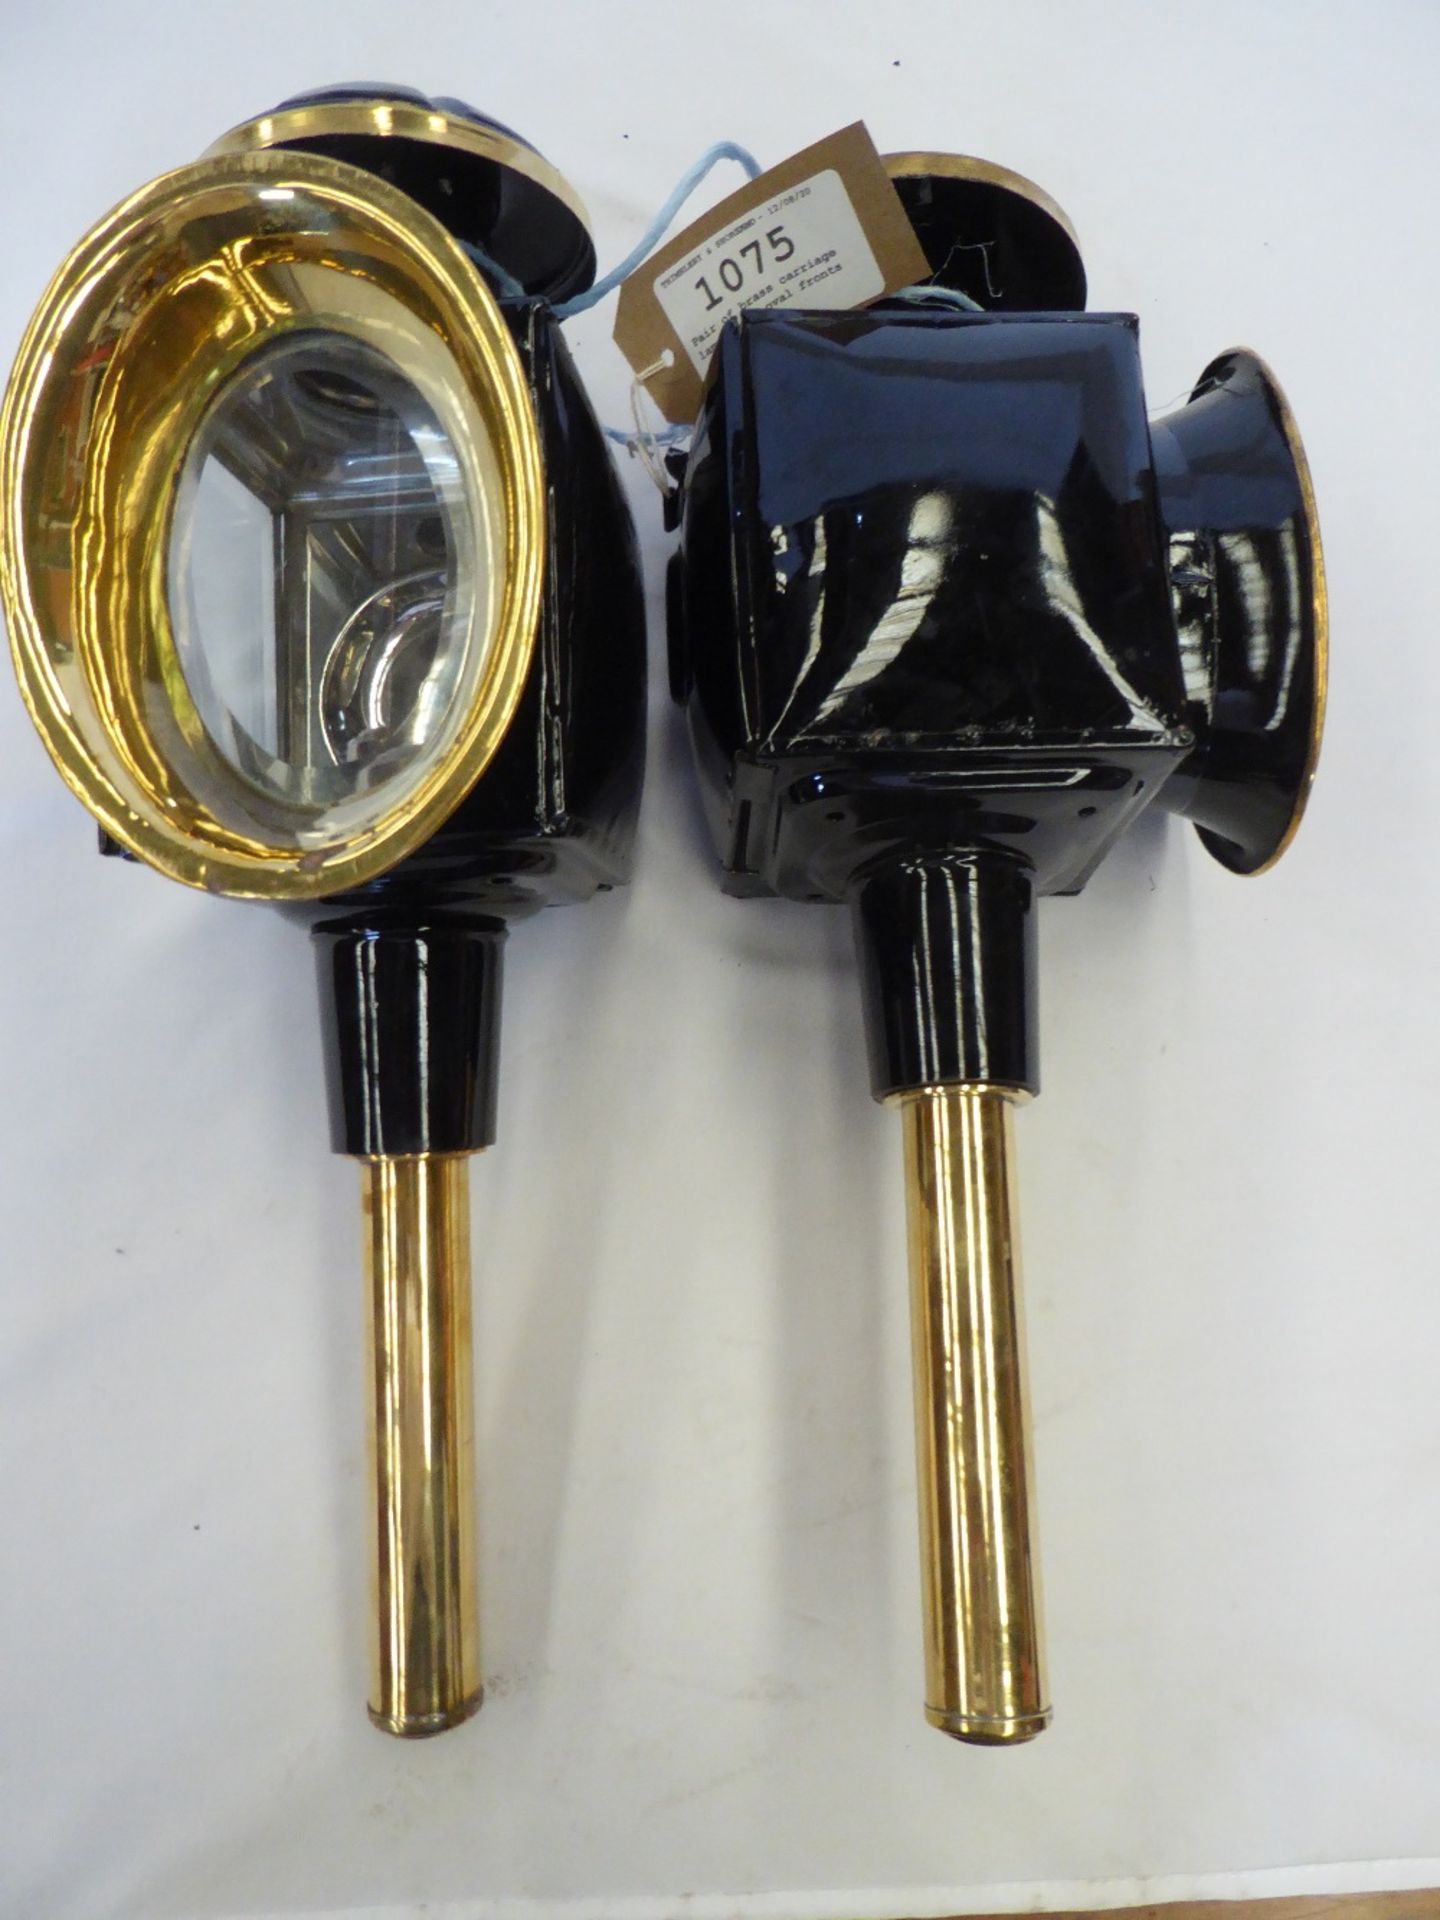 Pair of black/brass carriage lamps with oval fronts - carries VAT